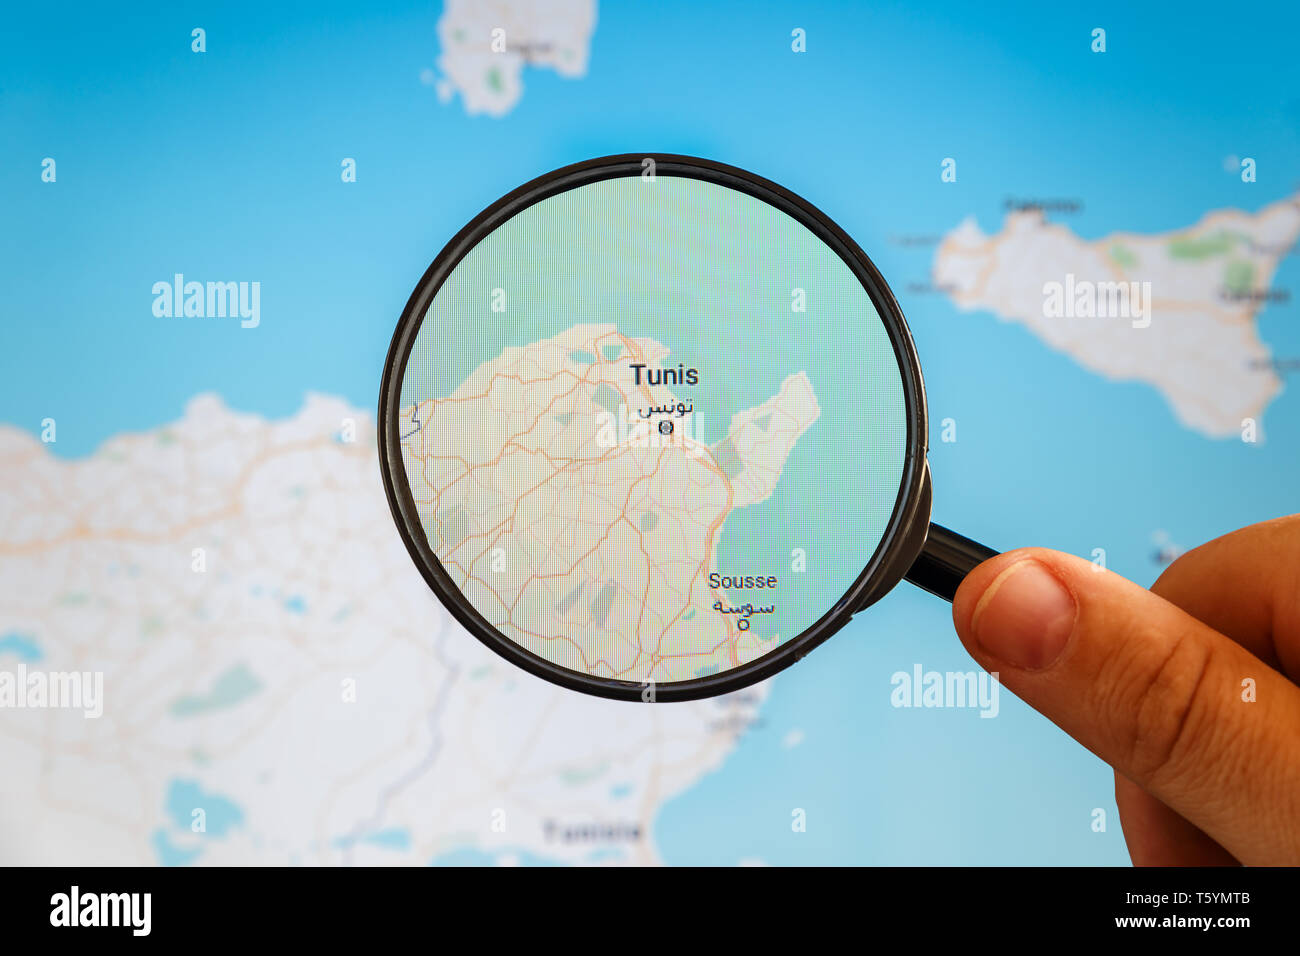 Tunis, Tunisia. Political map. City visualization illustrative concept on display screen through magnifying glass in the hand. Stock Photo